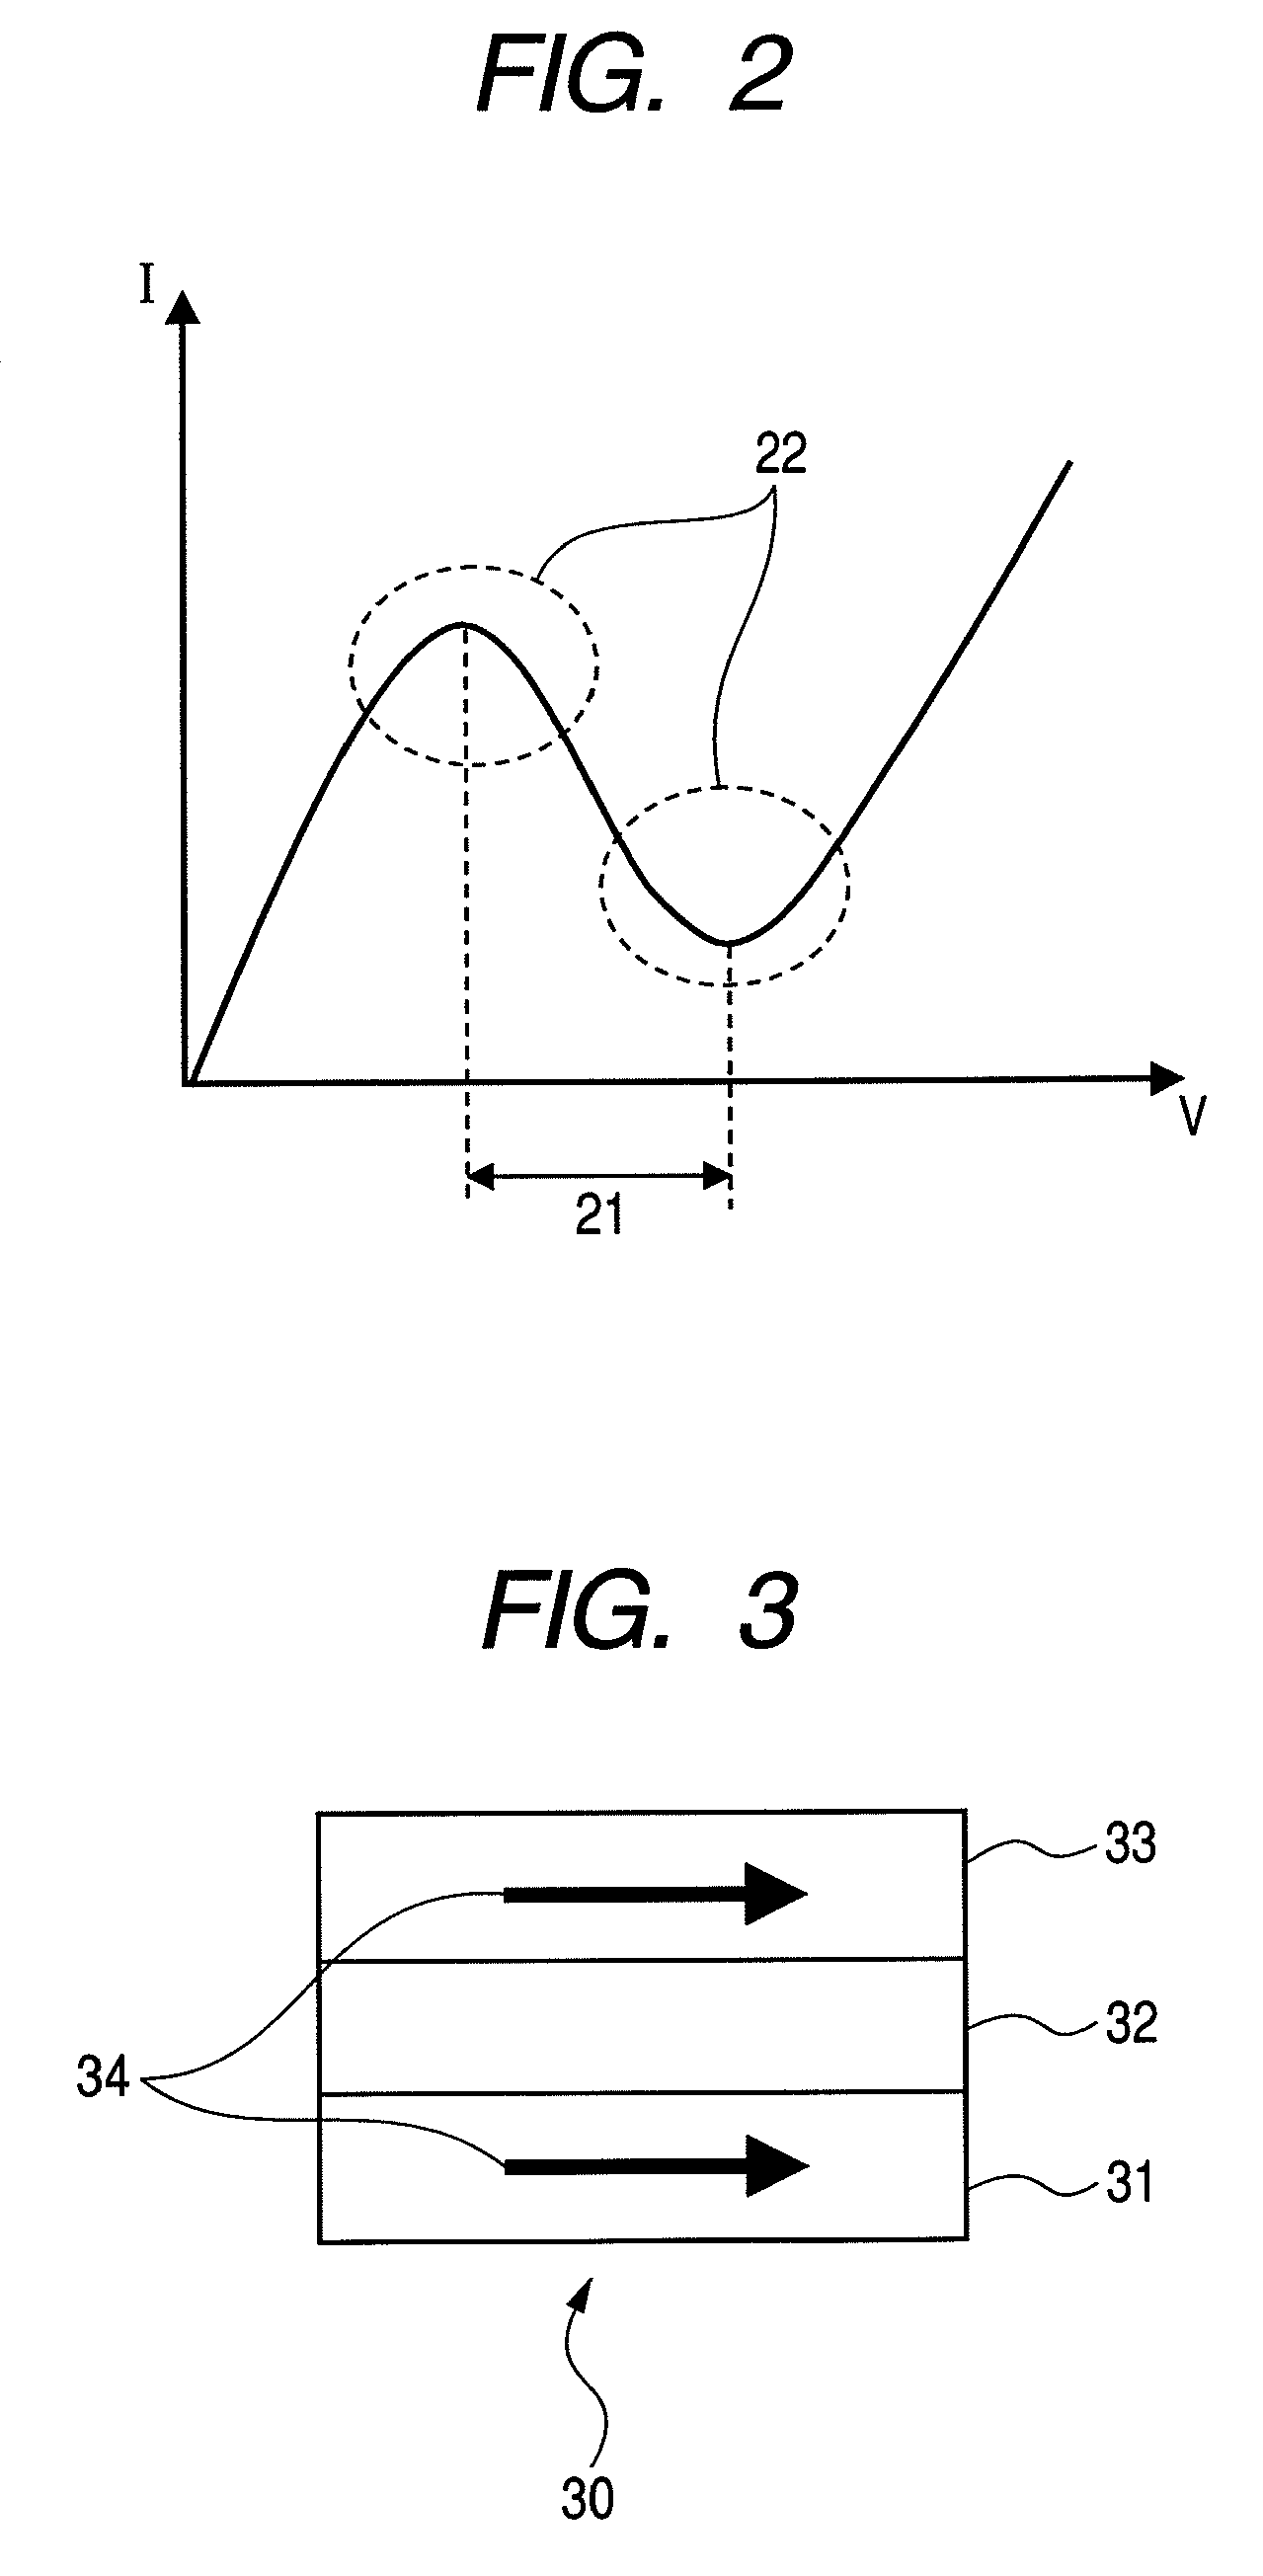 Negative-resistance device with the use of magneto-resistive effect